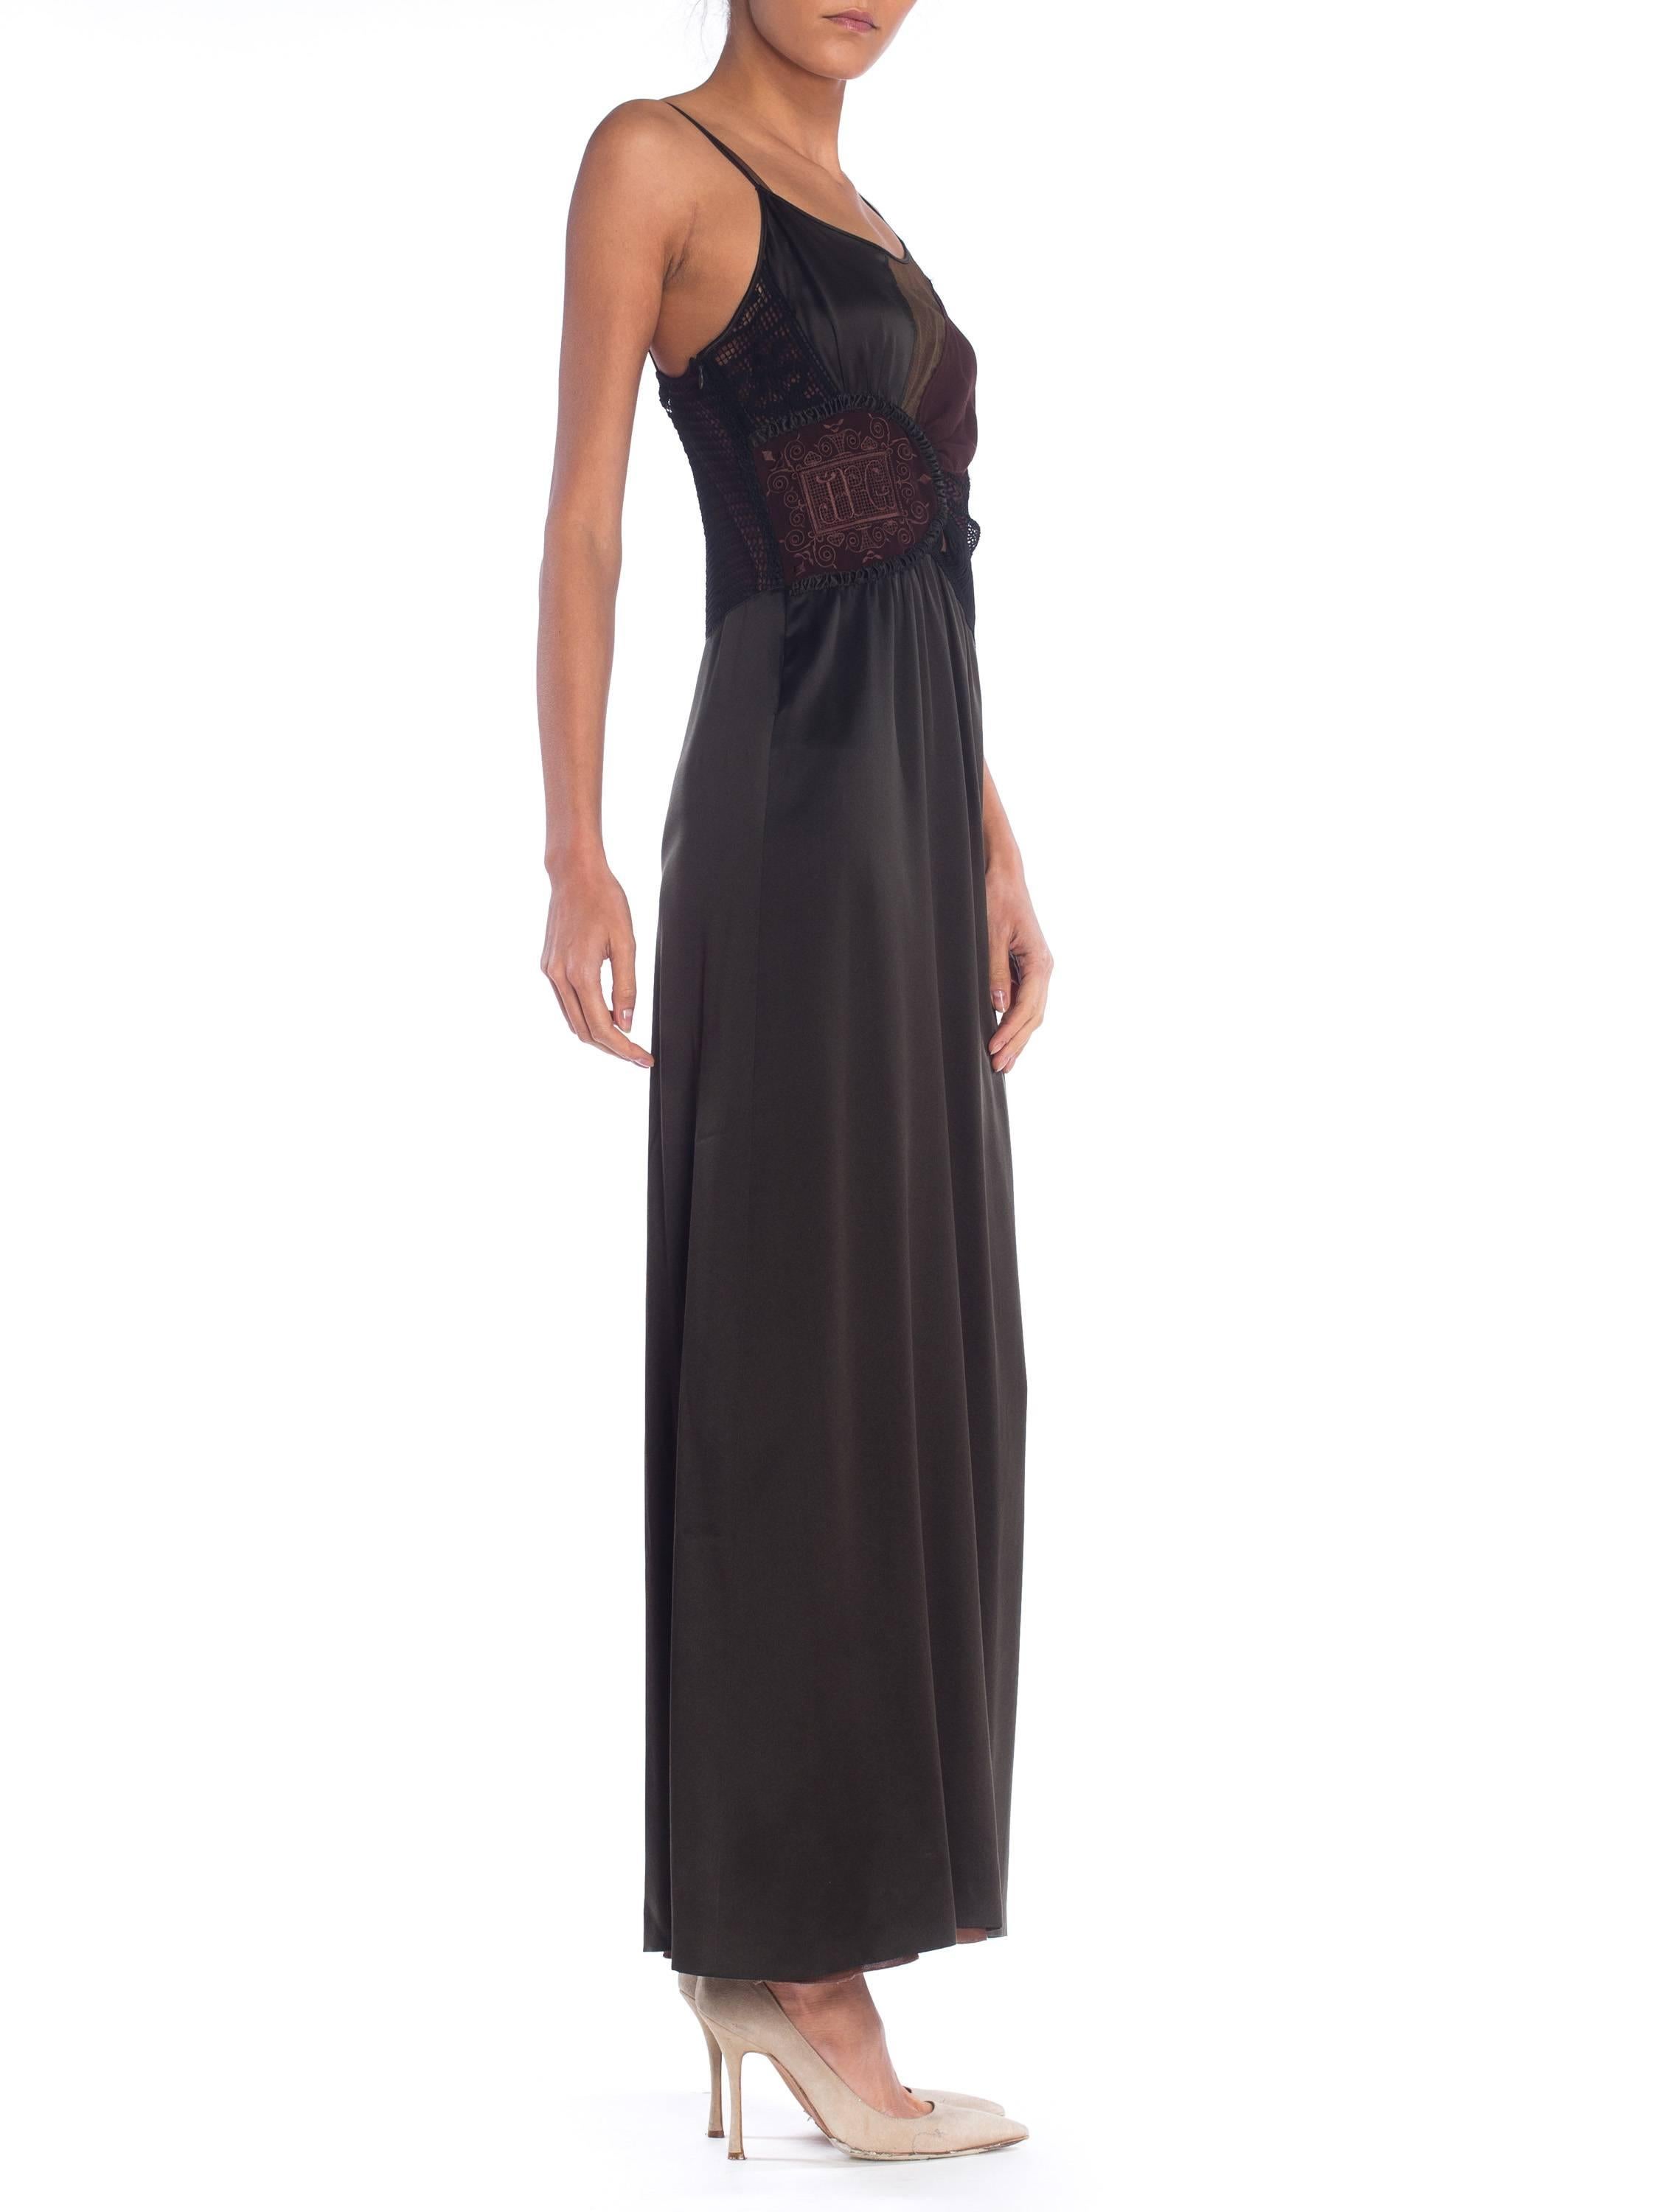 Dress has sheer and lace panels and comes with a slip